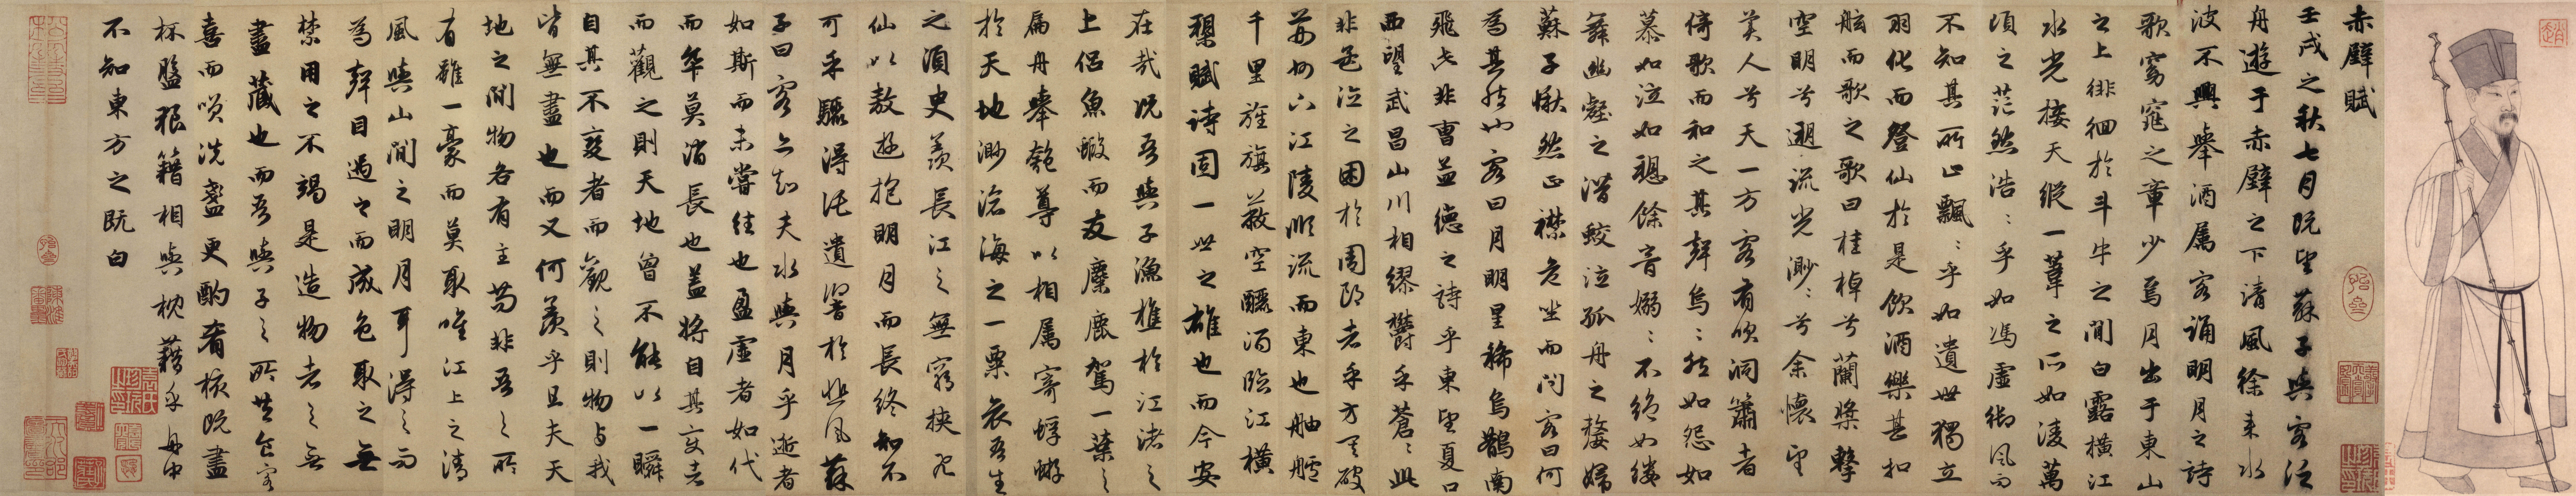 Chinese Character Text Calligraphy 16872x3248